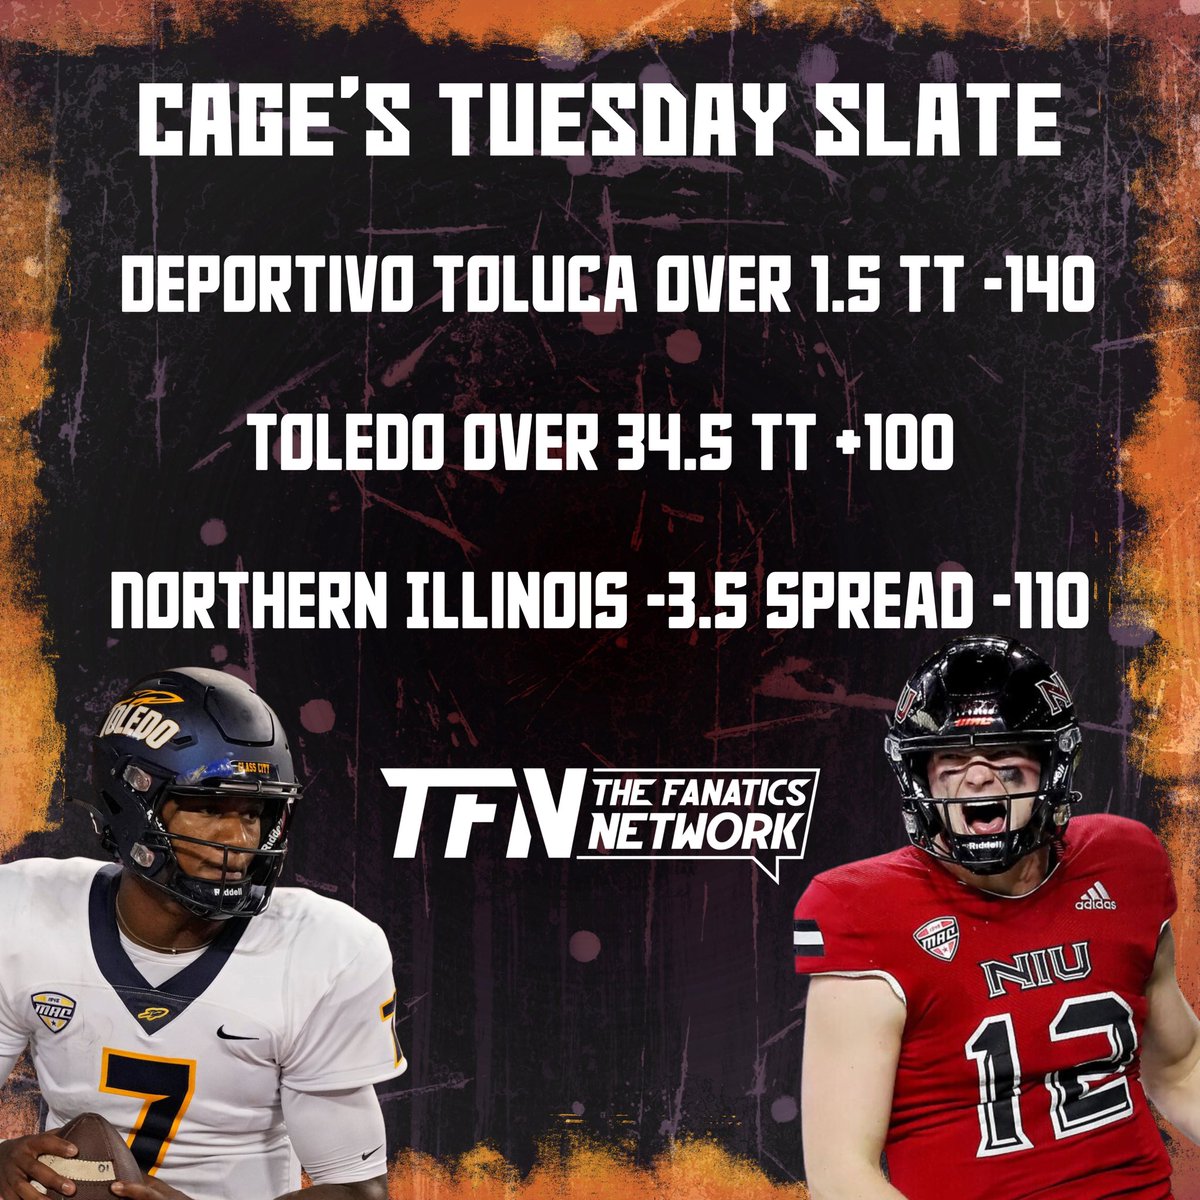 Here’s the #Tuesday slate by @CageIq for #Halloween. Time to spook out another winning day!

#Toledo #Mexico #NCAAFootball   #bettingtwitter #SportsPicks #Toluca #NorthernIllinois